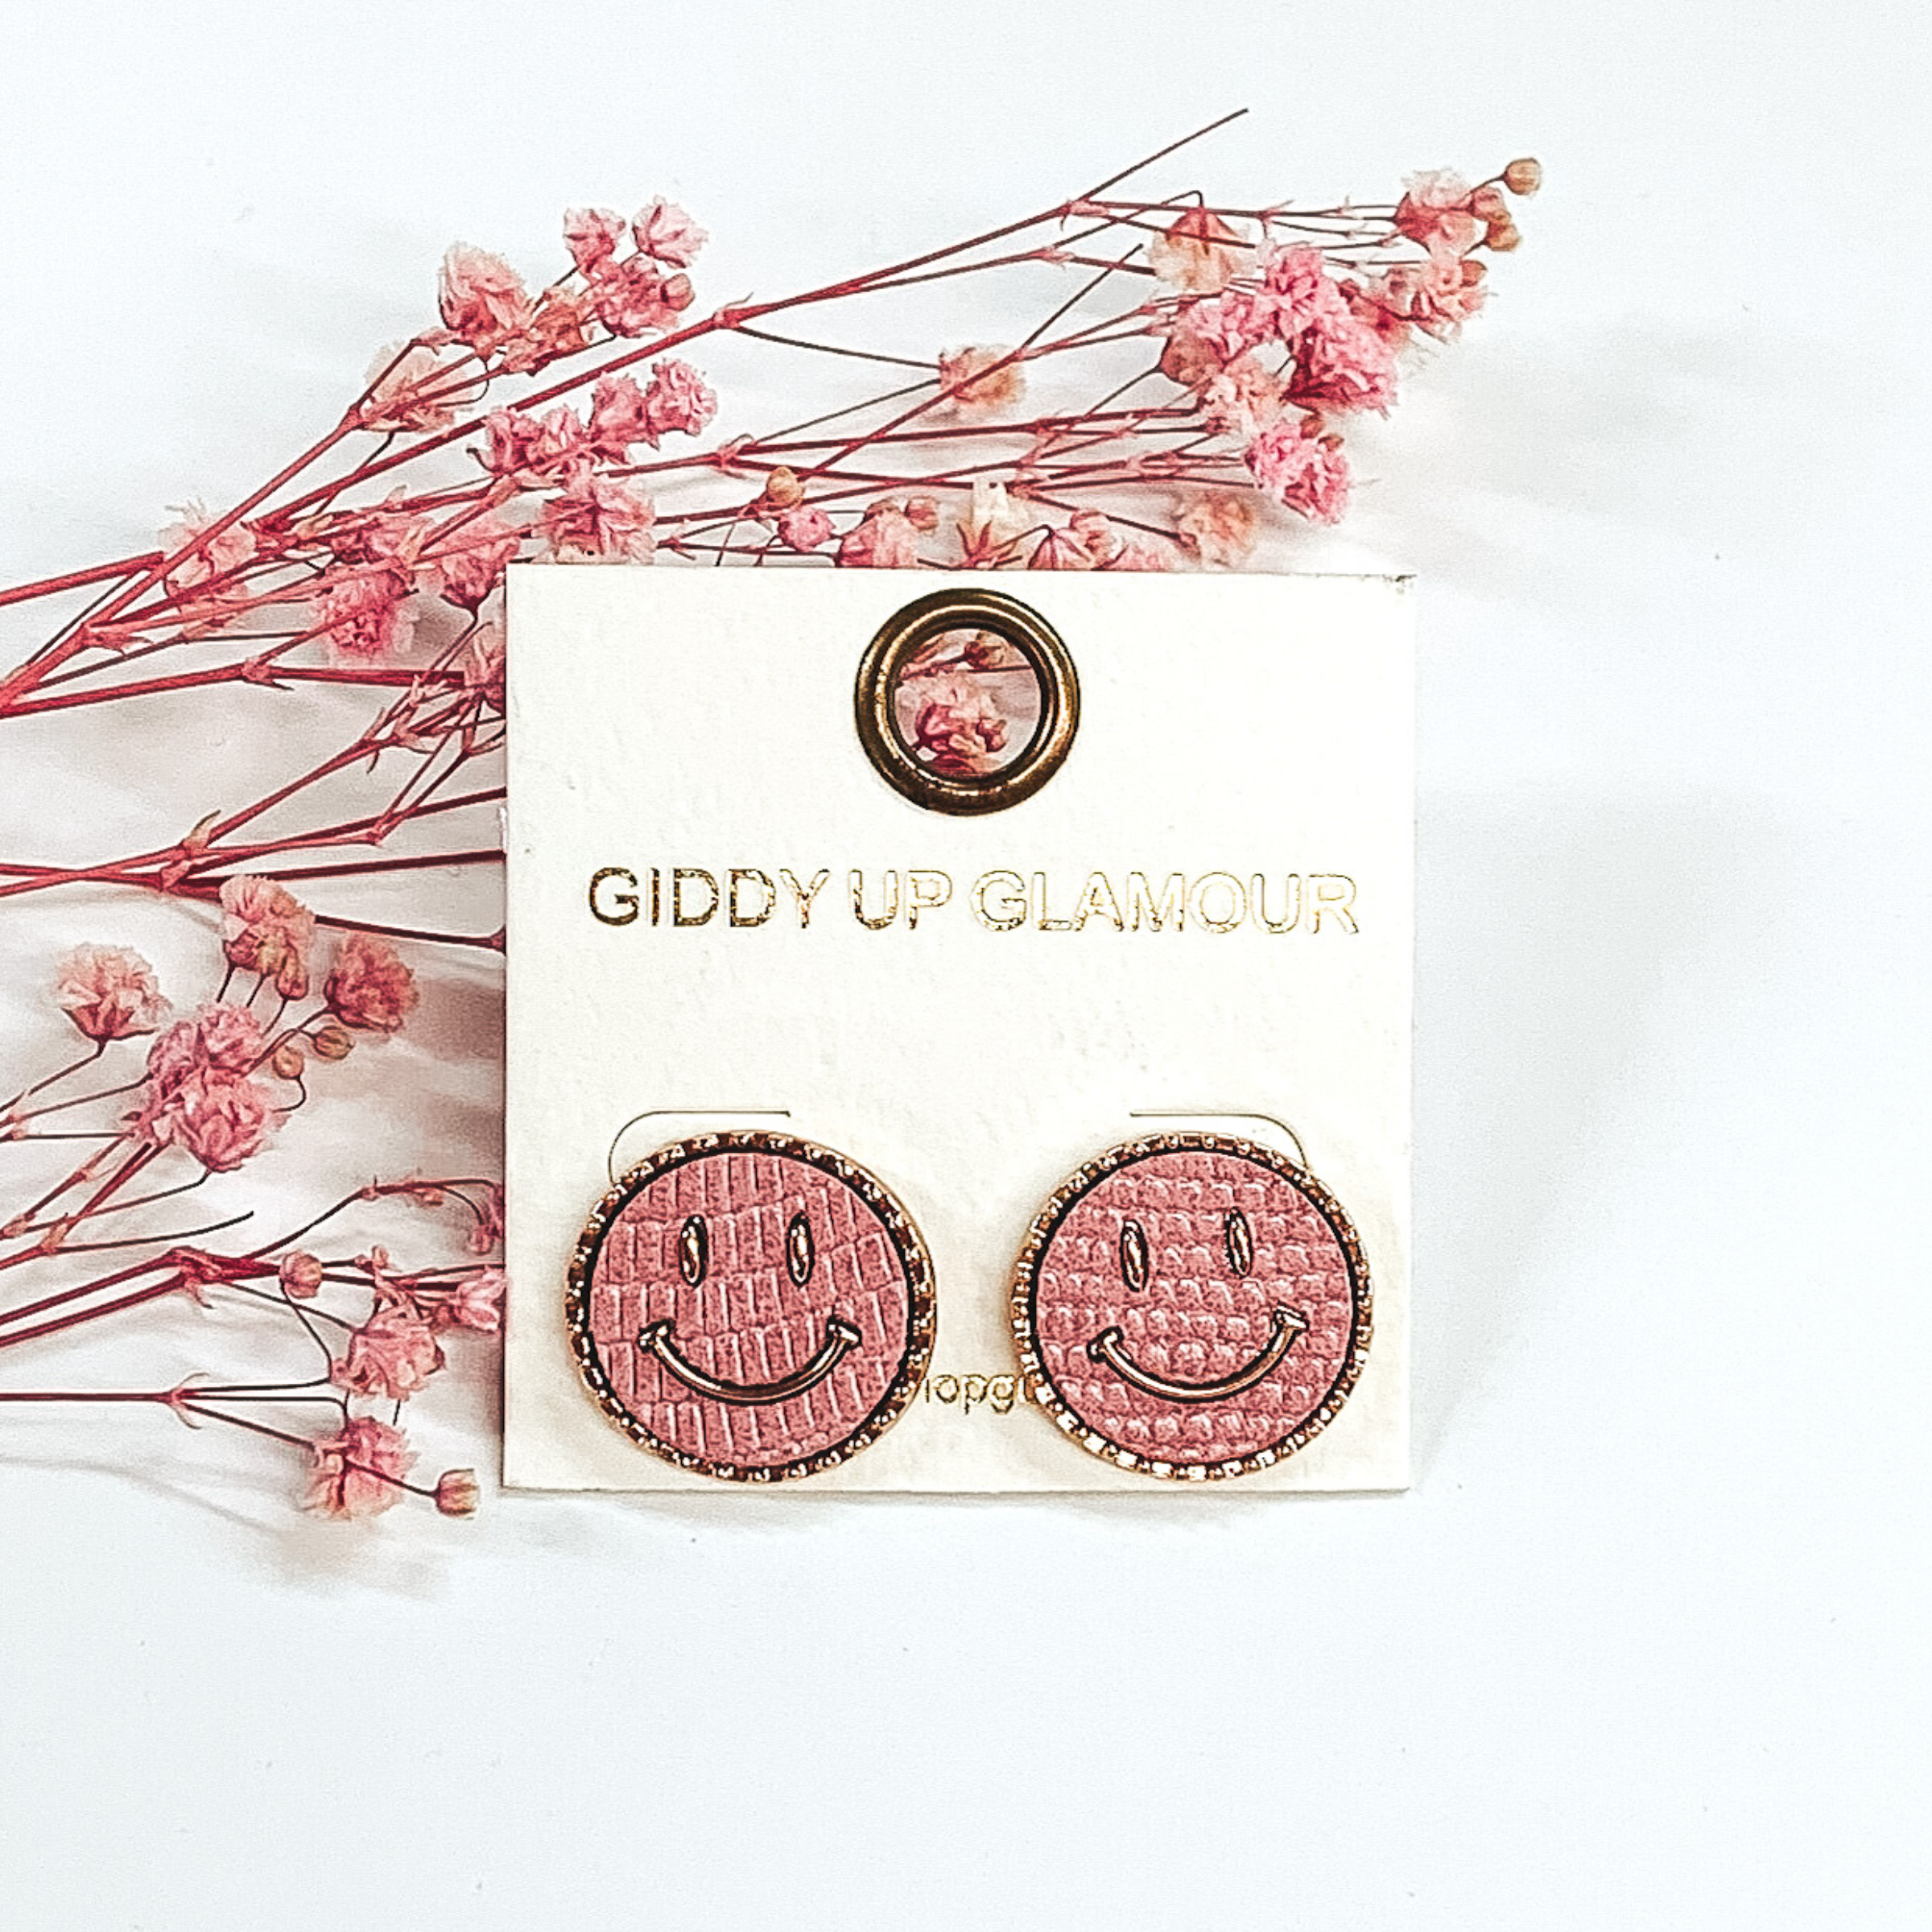 Gold round stud earrings with a pink animal print inlay and a gold smiley face. These earrings are pictured a white background with pink babys breath.